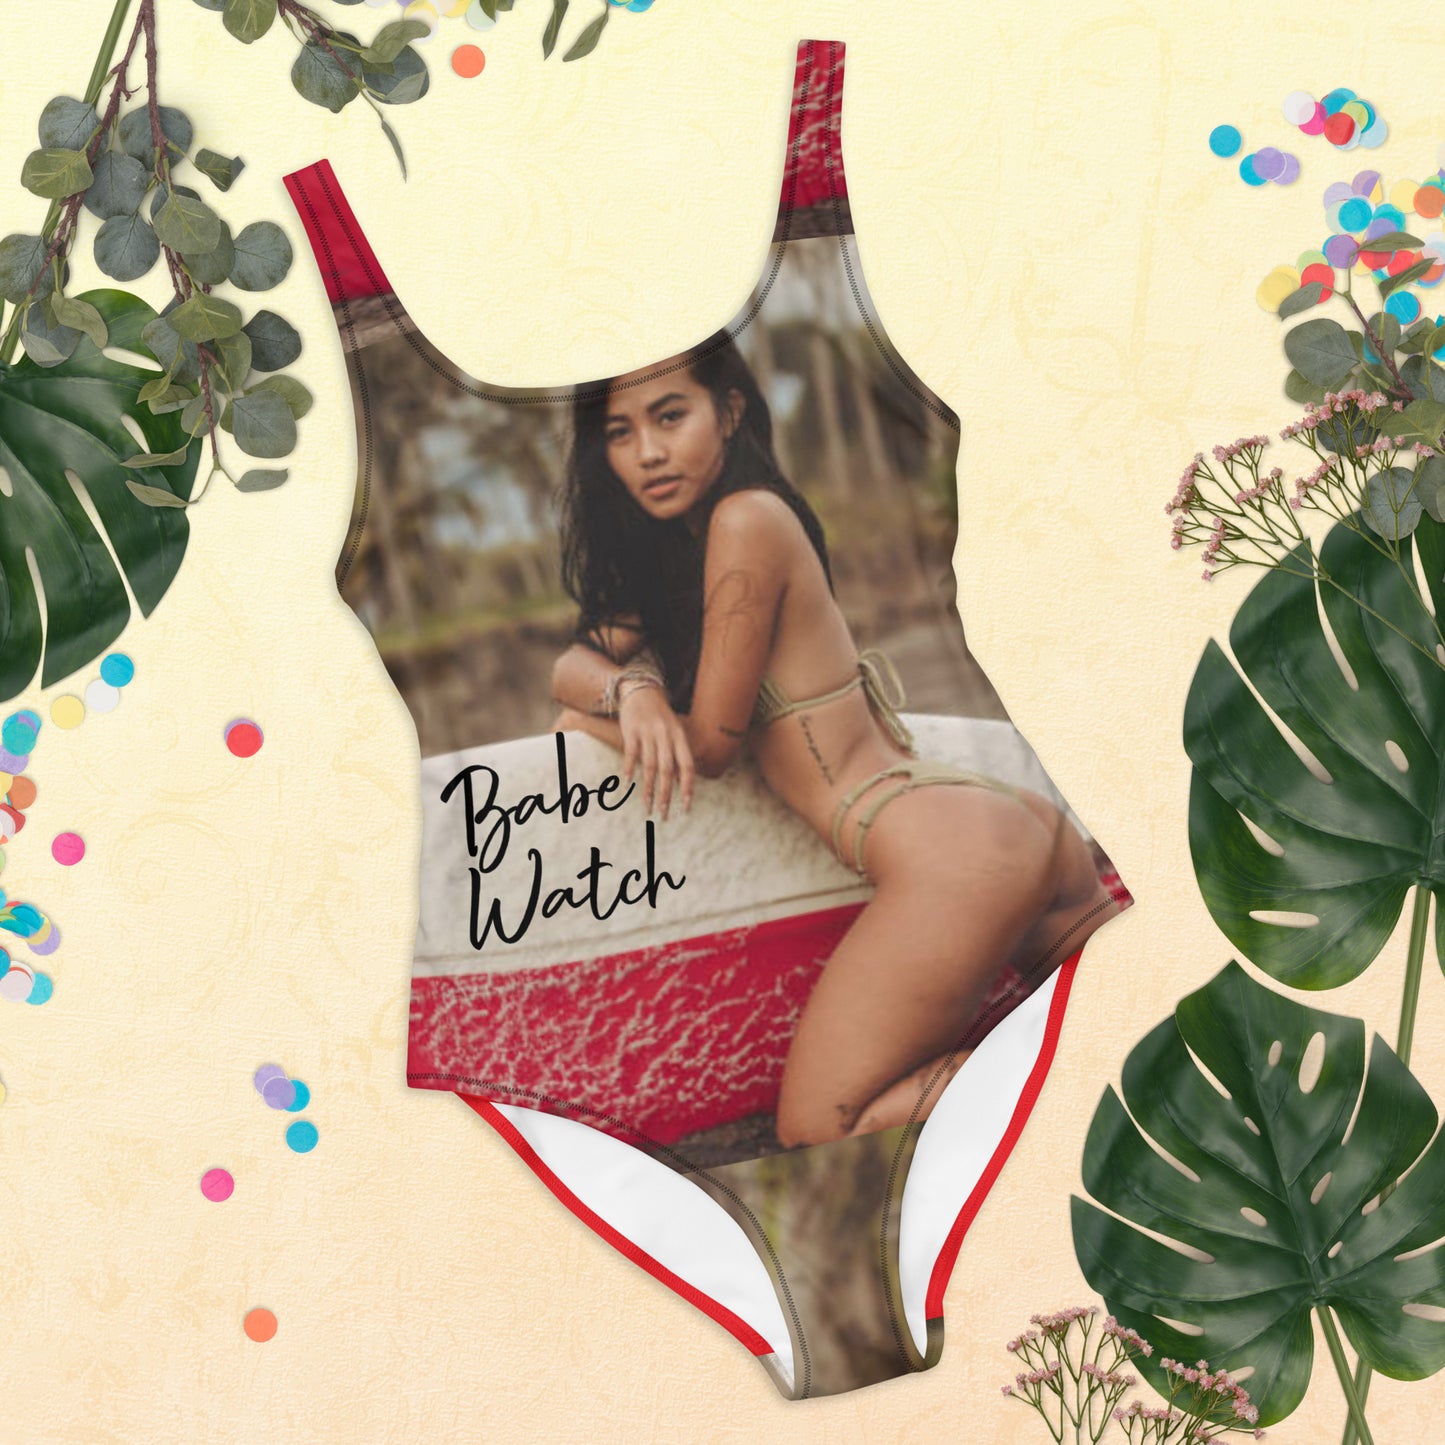 BabeWatch Swimsuit-Asian Persuasion